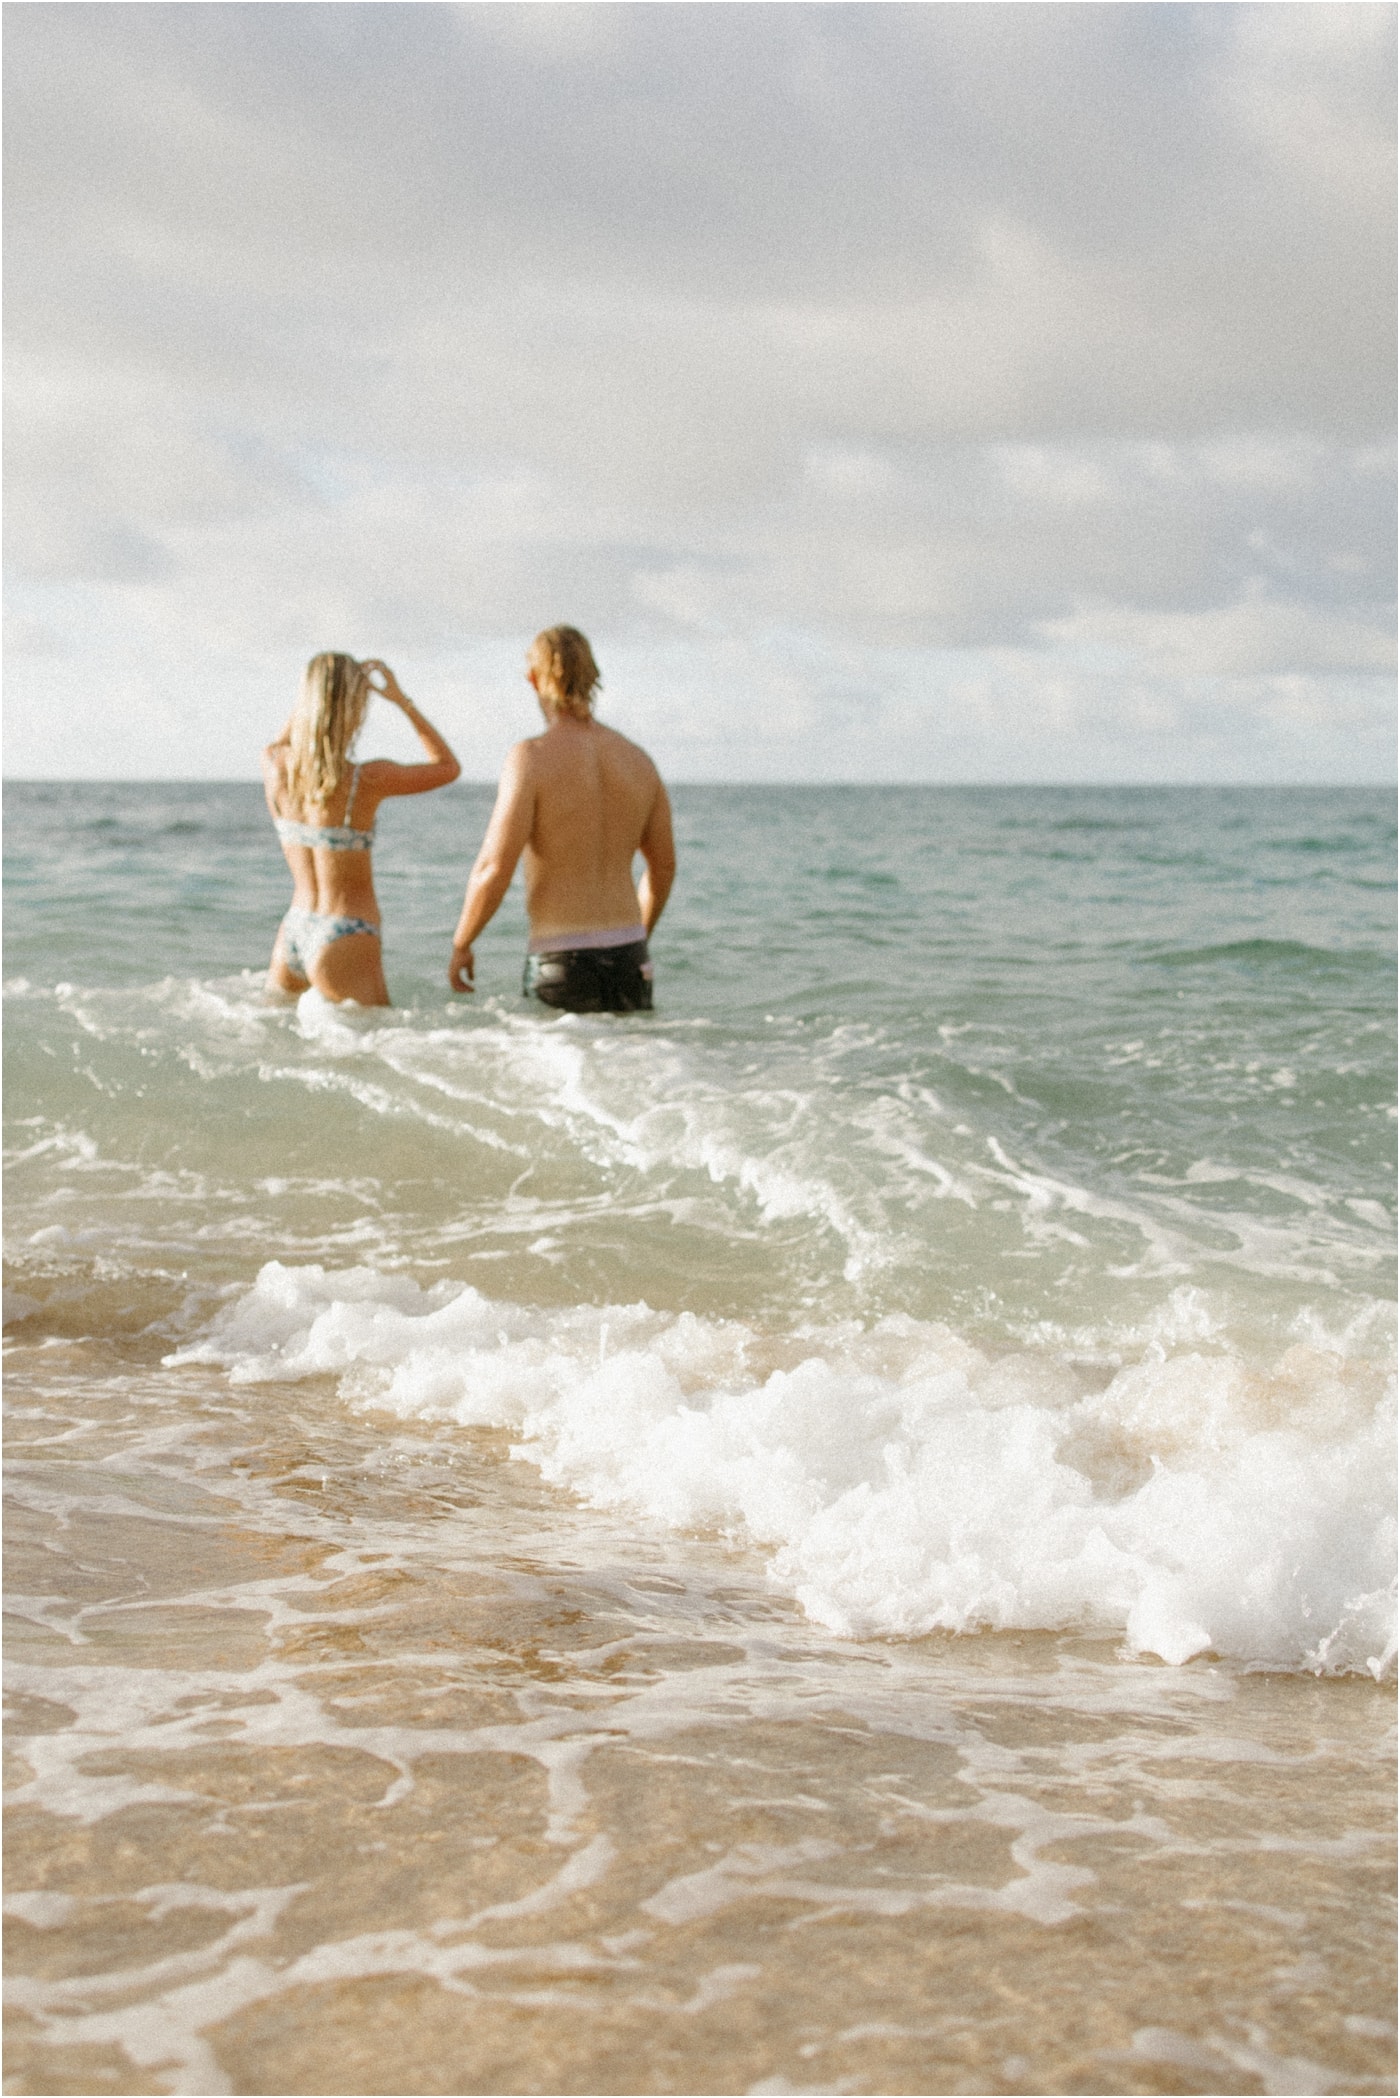 How to have a sustainable elopement in Hawaii